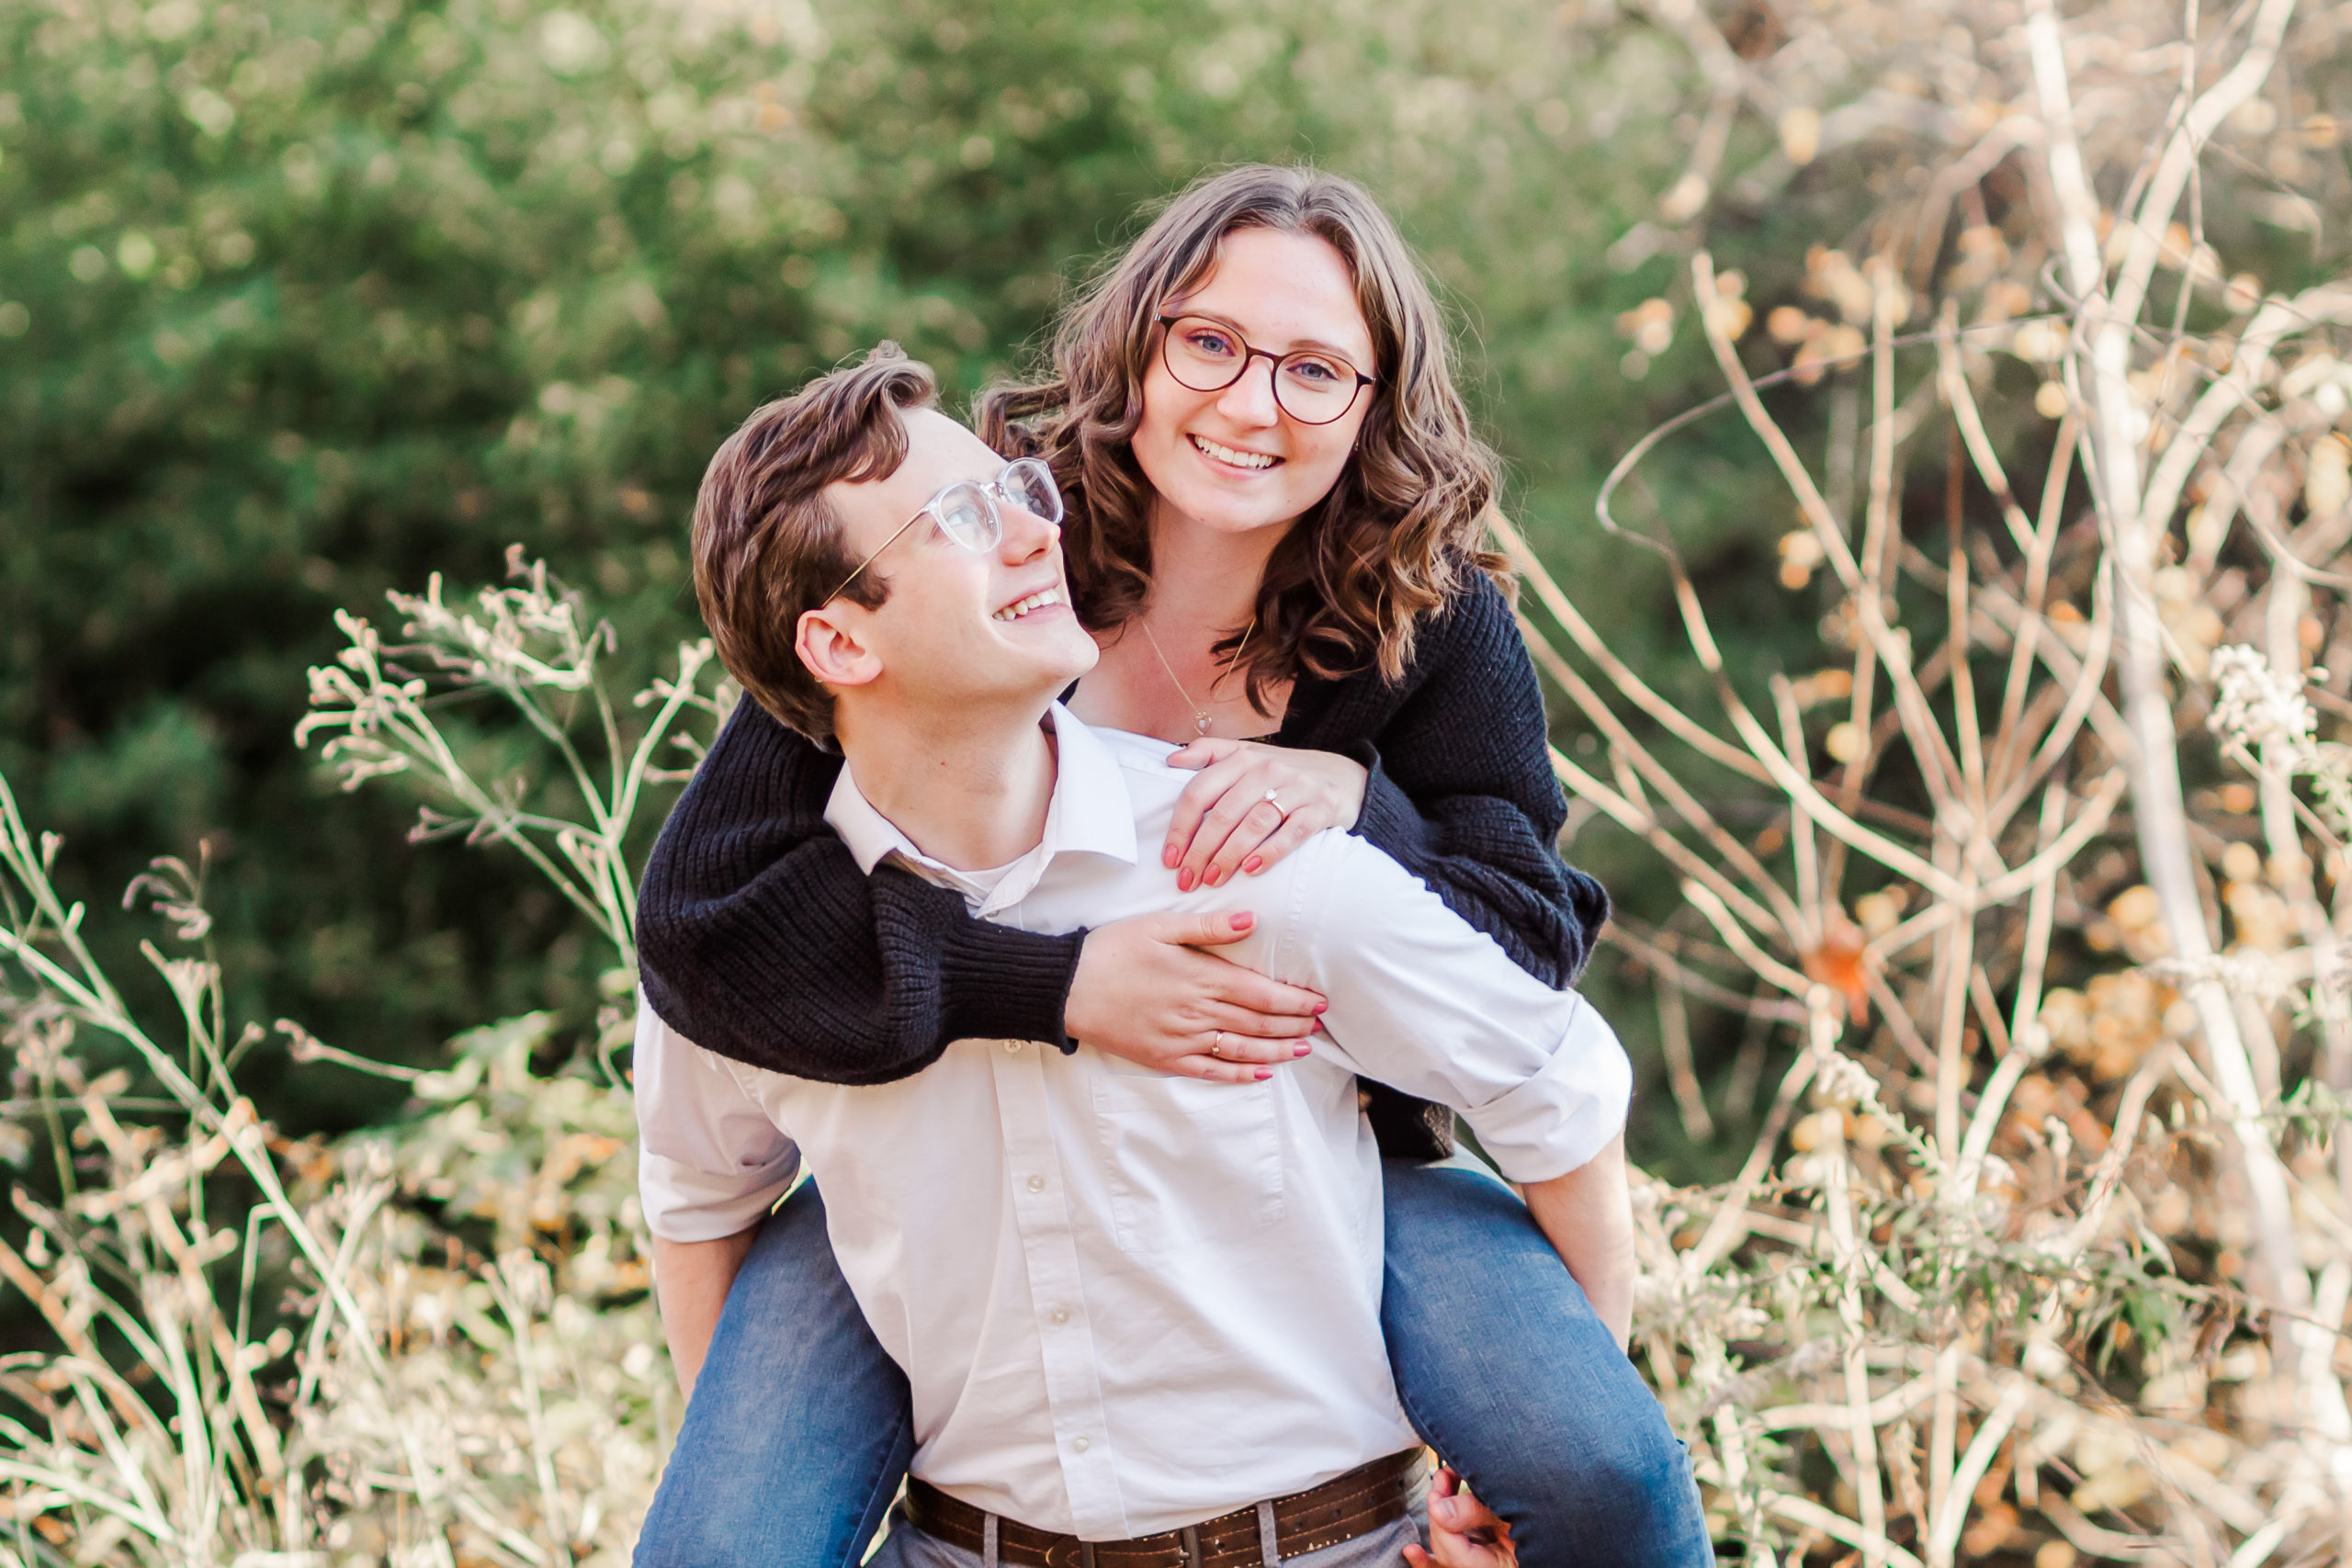 Kaitlyn getting a piggy back ride from her fiancé James at Bass Lake Park engagement session